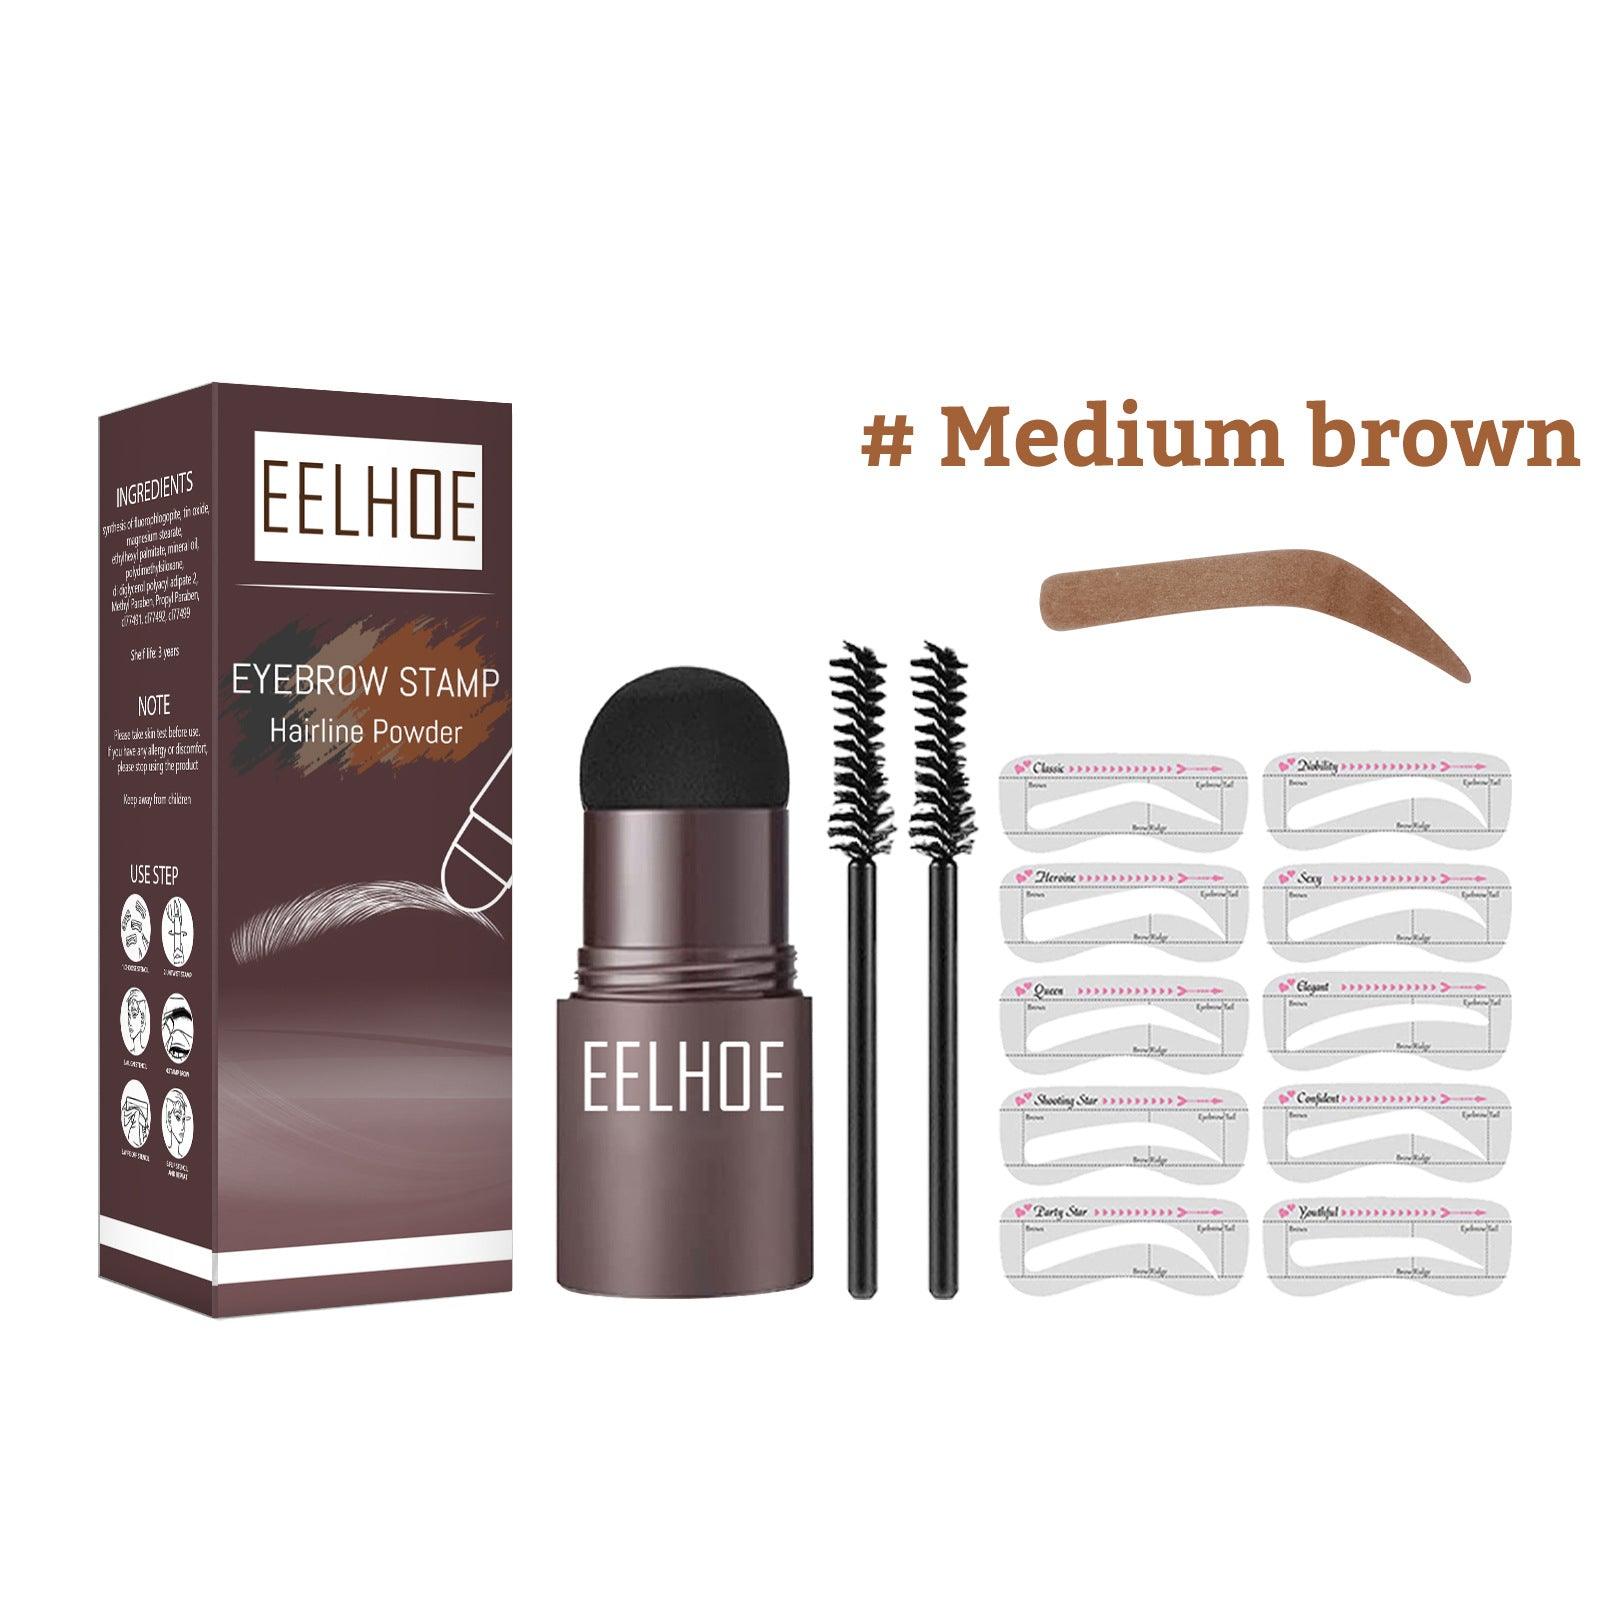 Eyebrow stamp- FILL IN THE BROWS PERFECTLY EVERY TIME LIKE A PRO! - dressowy